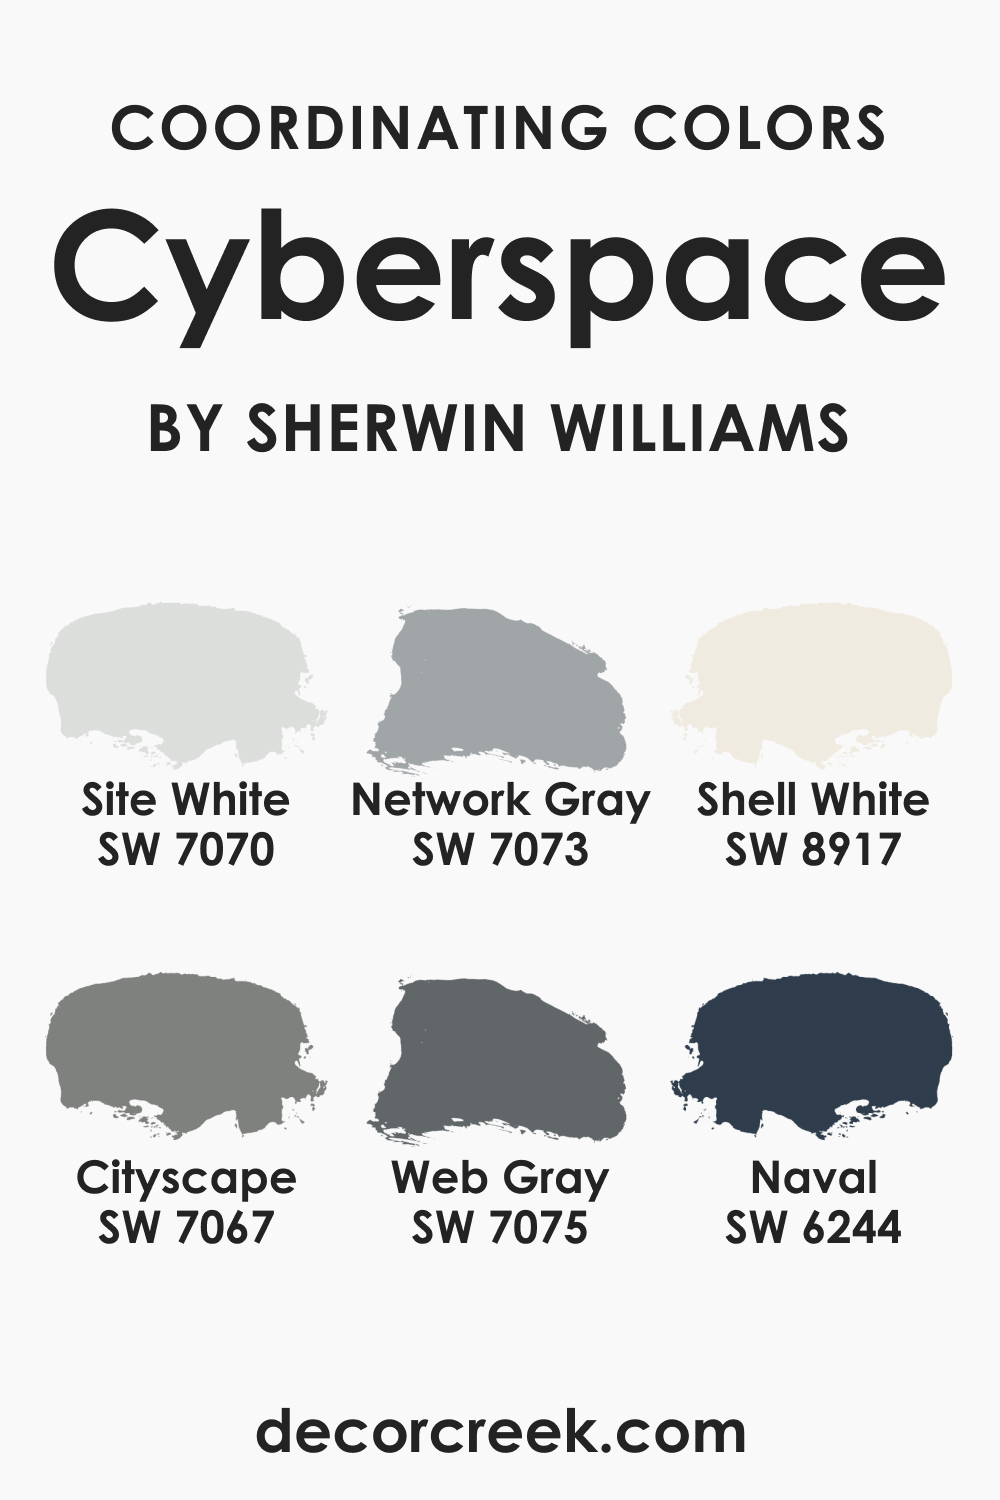 Coordinating Colors of SW 7076 Cyberspace